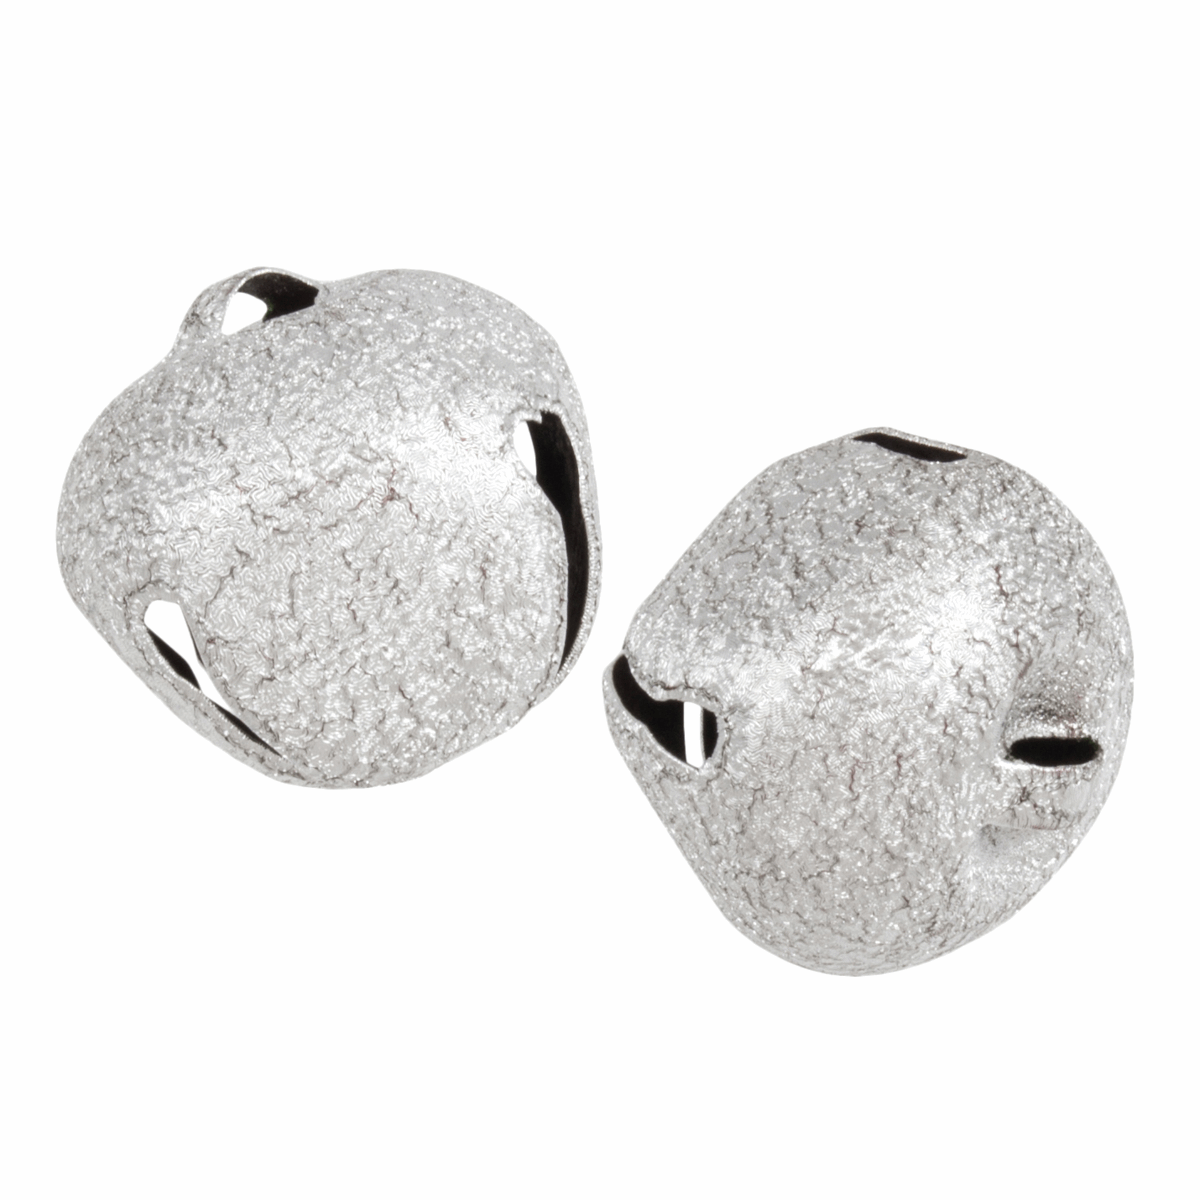 Trimits Frosted Silver Jingle Bells - 30mm (Pack of 2)